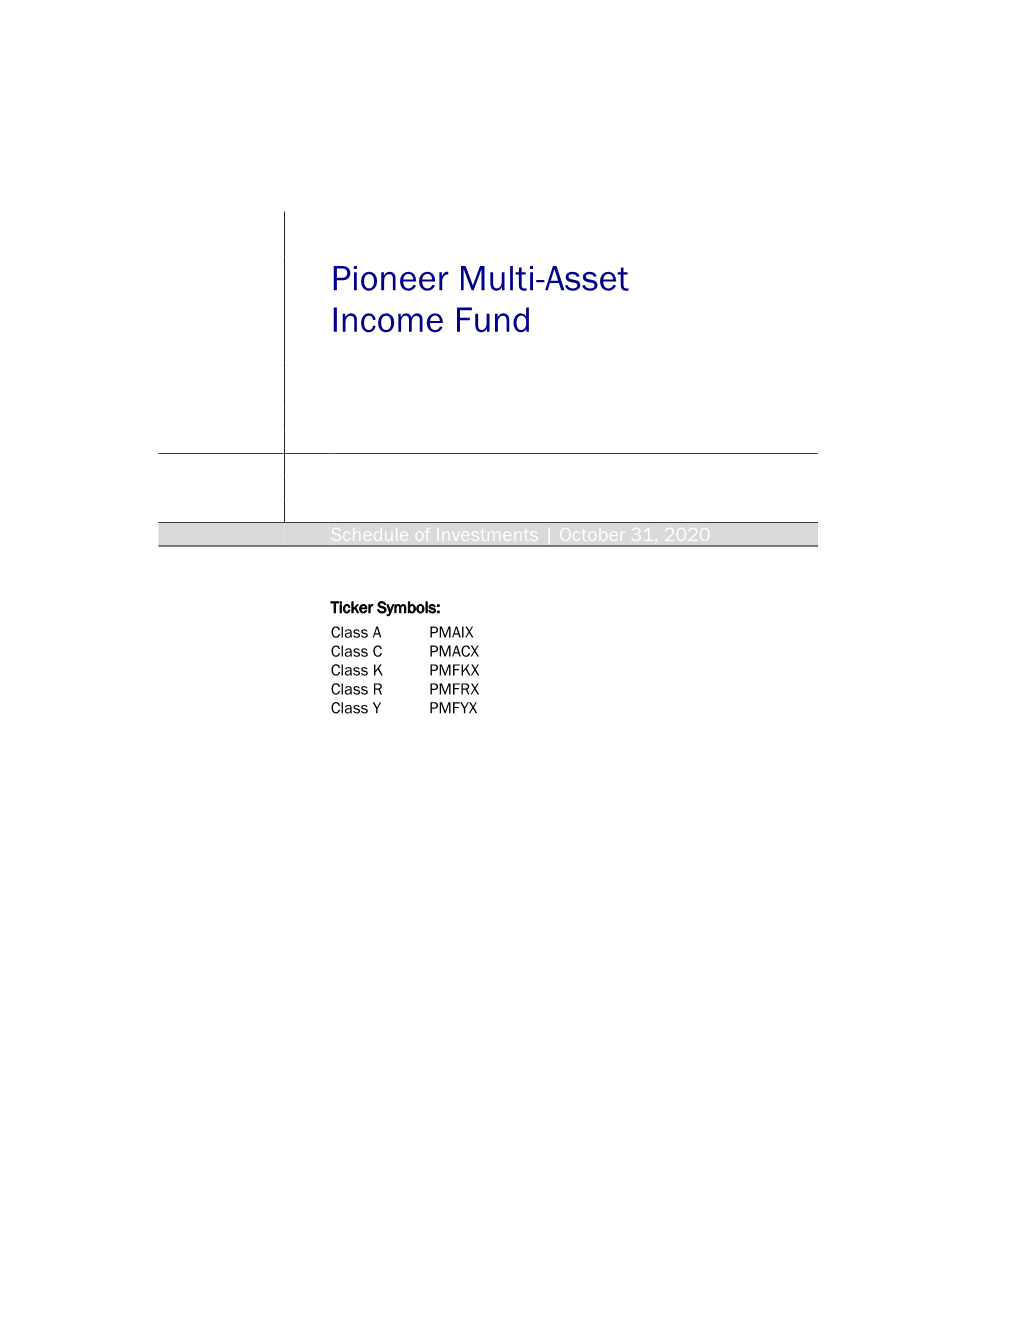 Pioneer Multi-Asset Income Fund